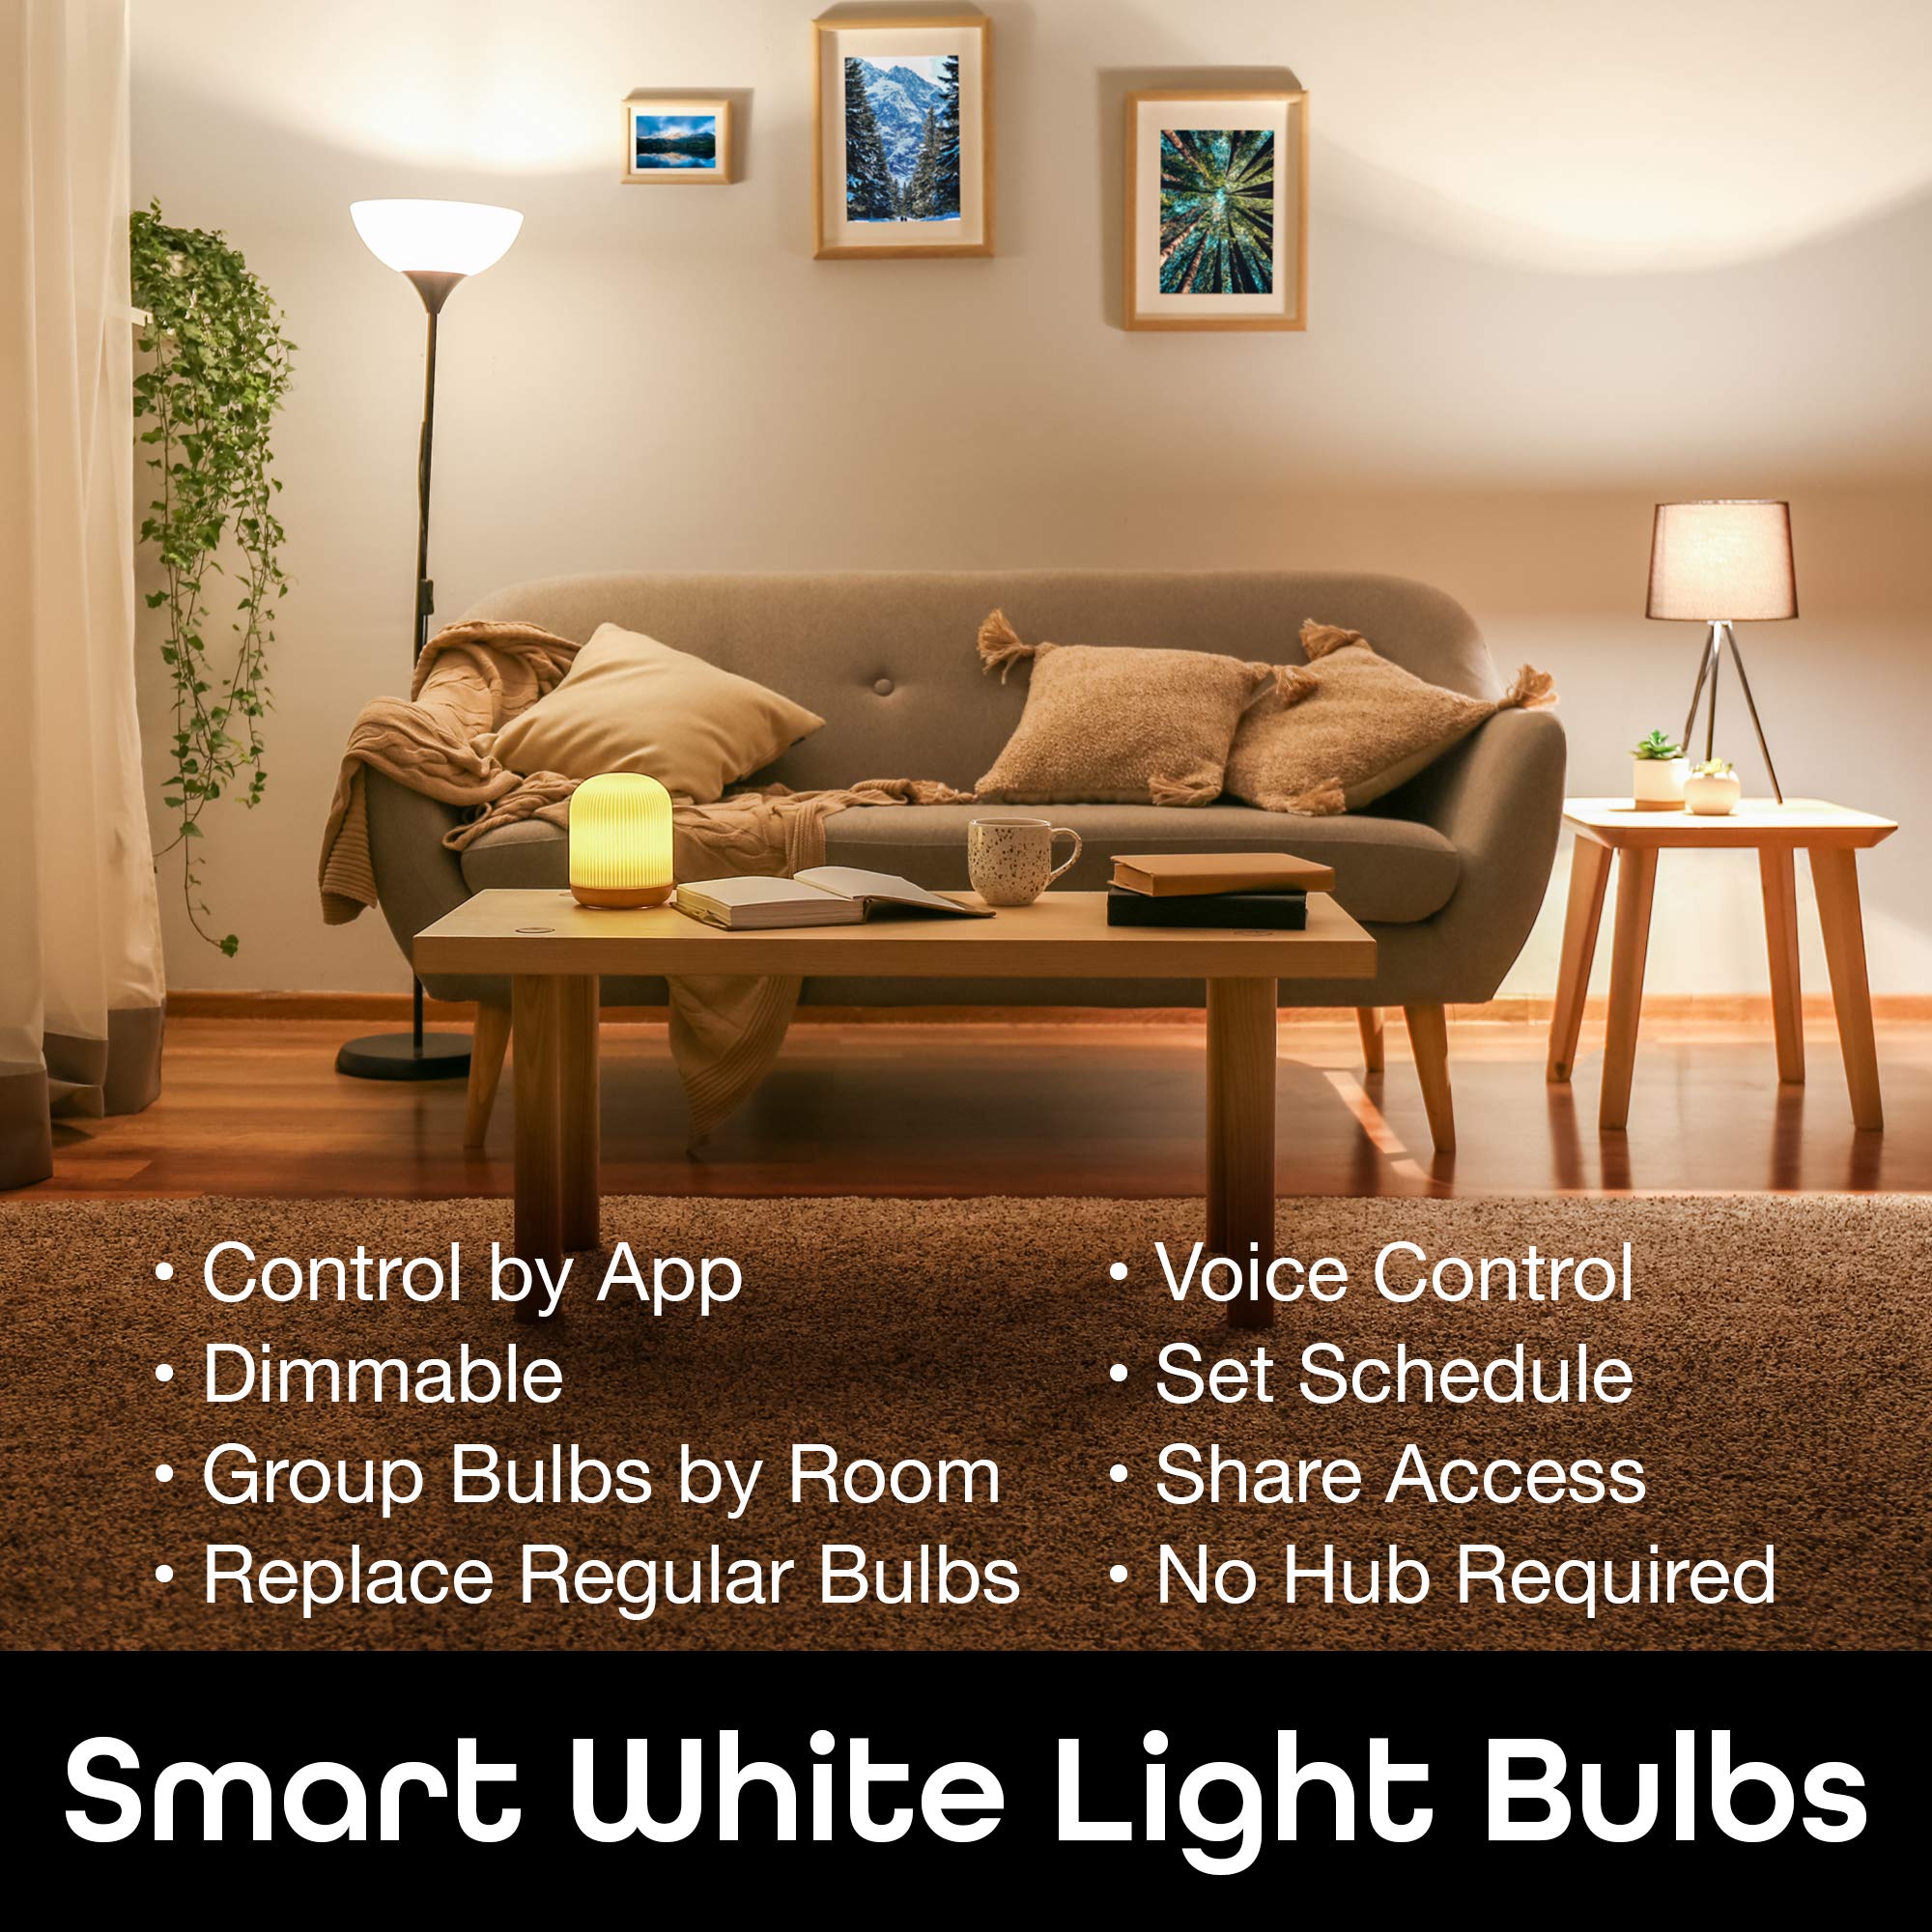 Geeni LUX 800 Dimmable A19 White LED Smart Home Light Bulbs, Works with Alexa and Google Home, No Hub Required, Requires 2.4GHz WiFi (3 Pack)